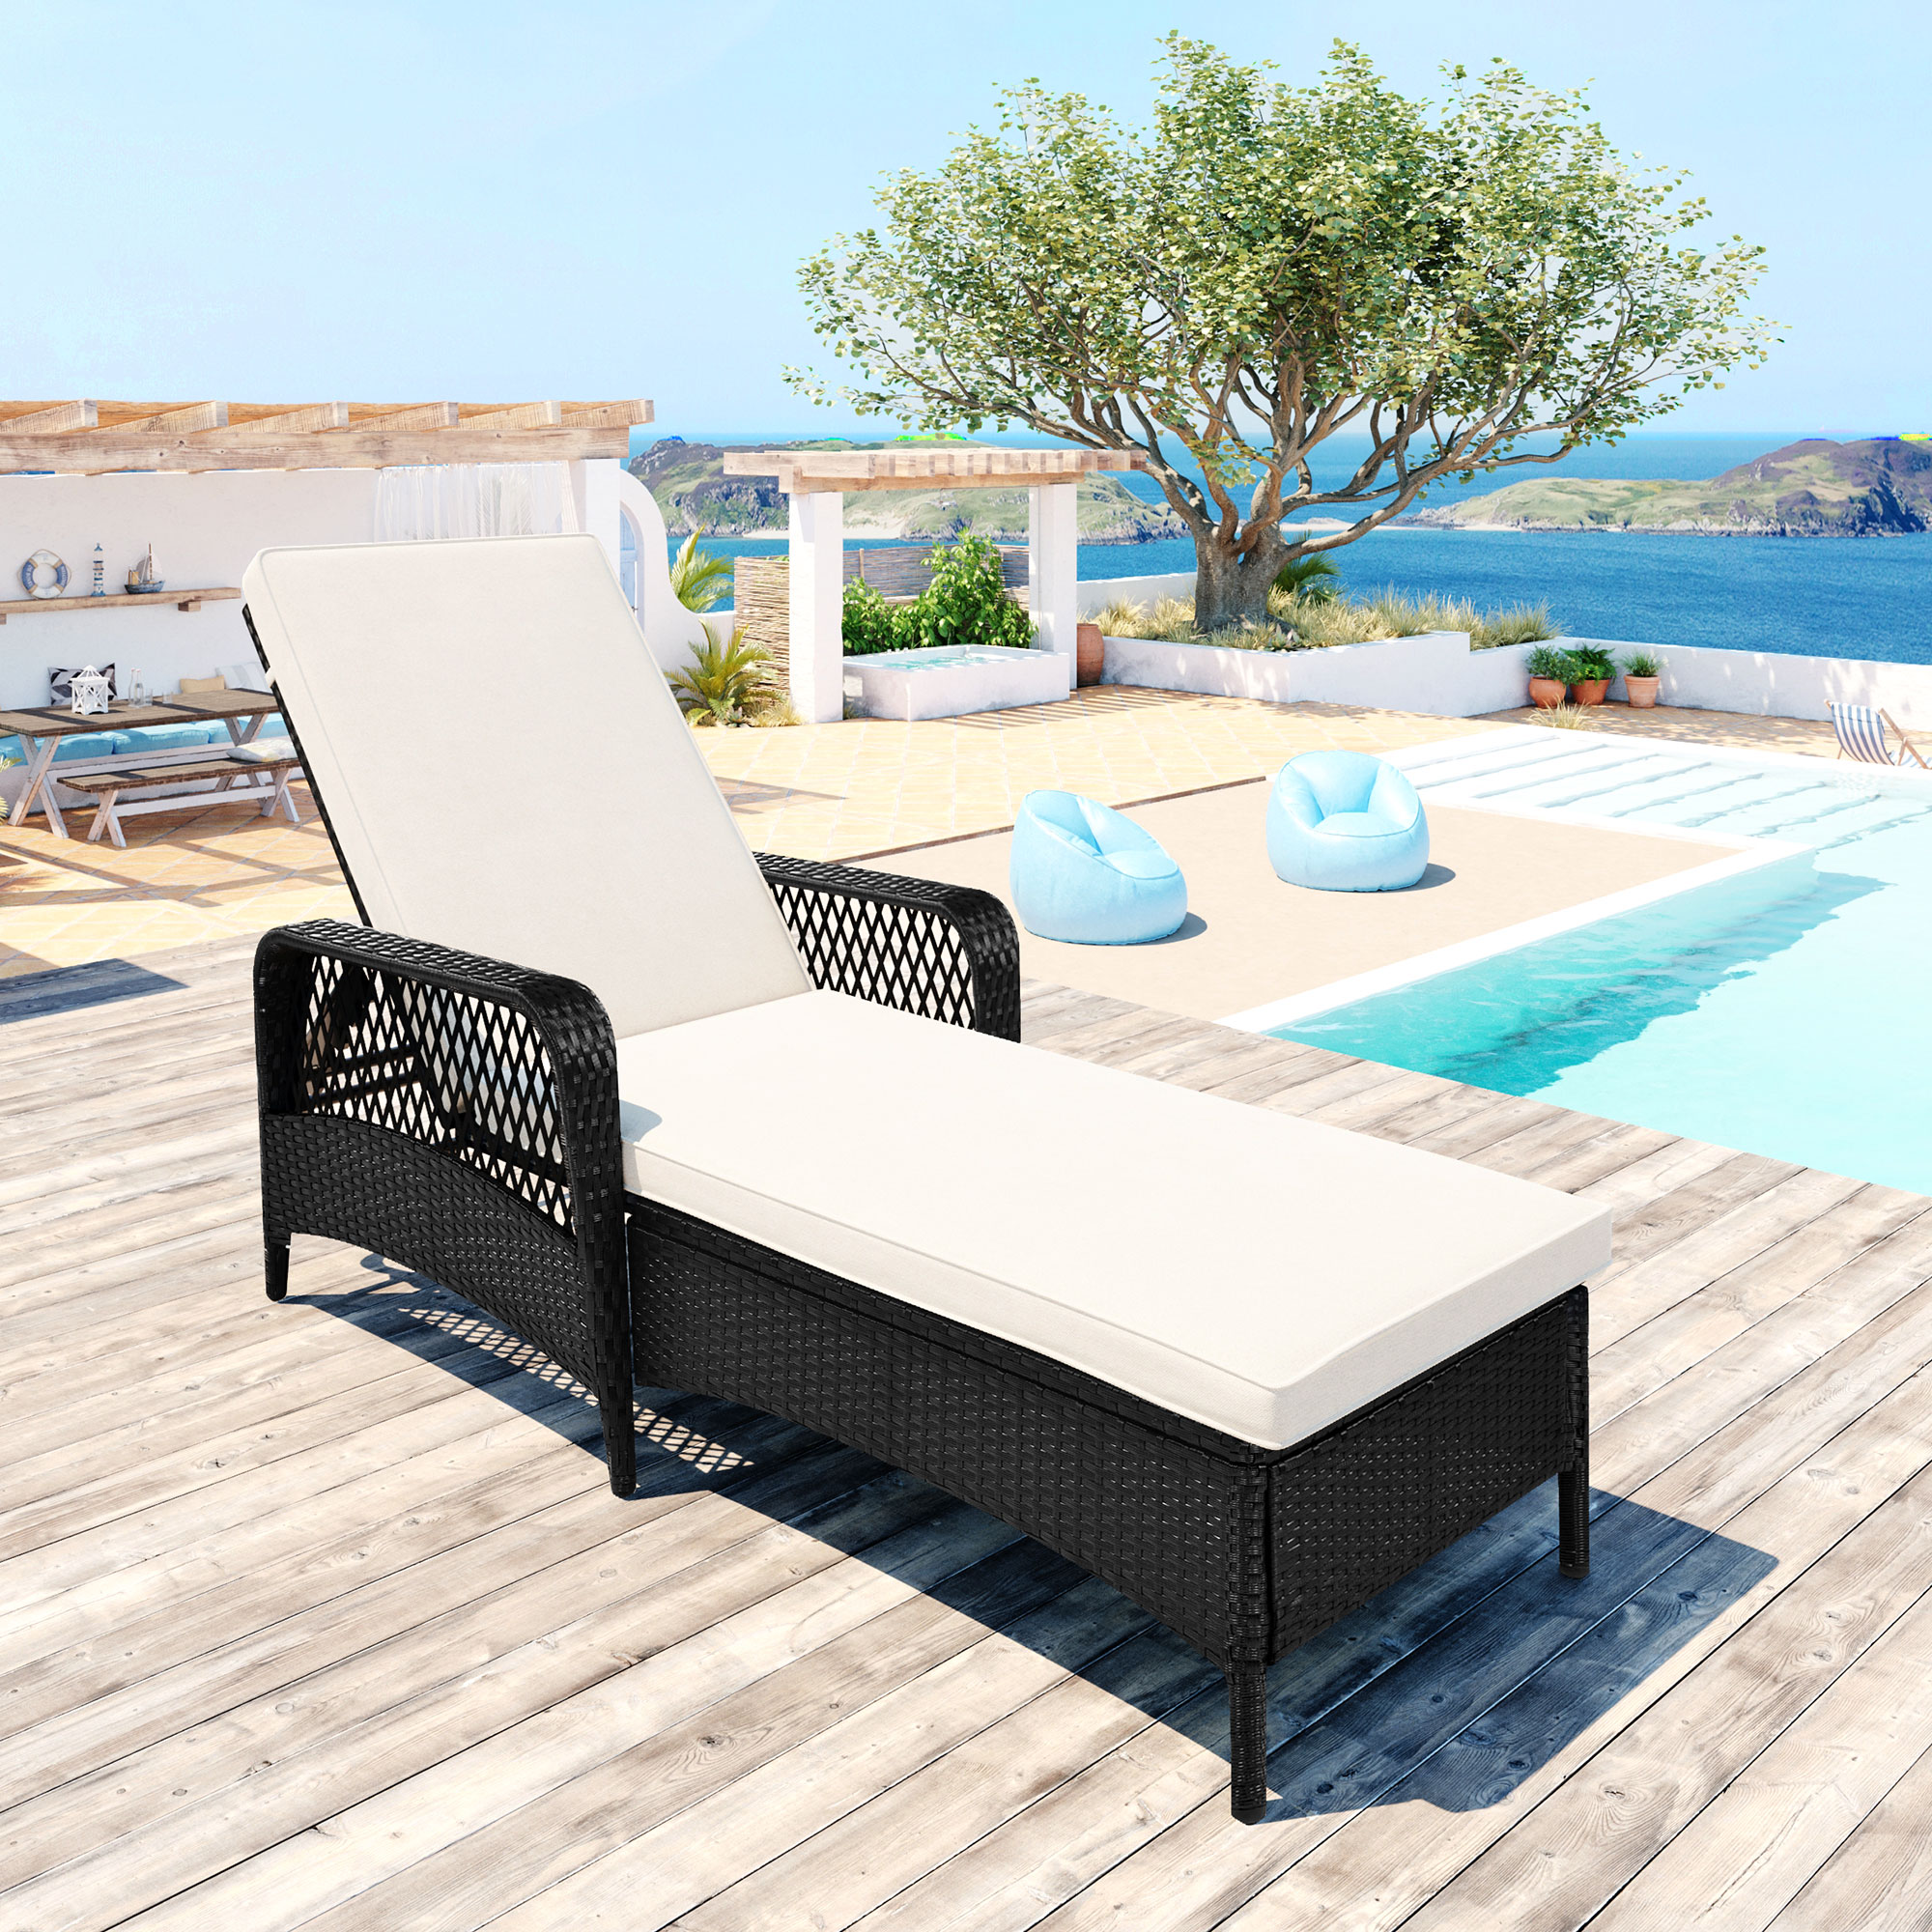 Patio Chaise Lounge Chair, Rattan Wicker Chaise Lounge, All-Weather Sun Chaise Lounge Furniture, Pool Furniture Sunbed with Removable Cushion, Tanning Lounge Chair with 6 Adjustable Positions, B332 - image 2 of 9